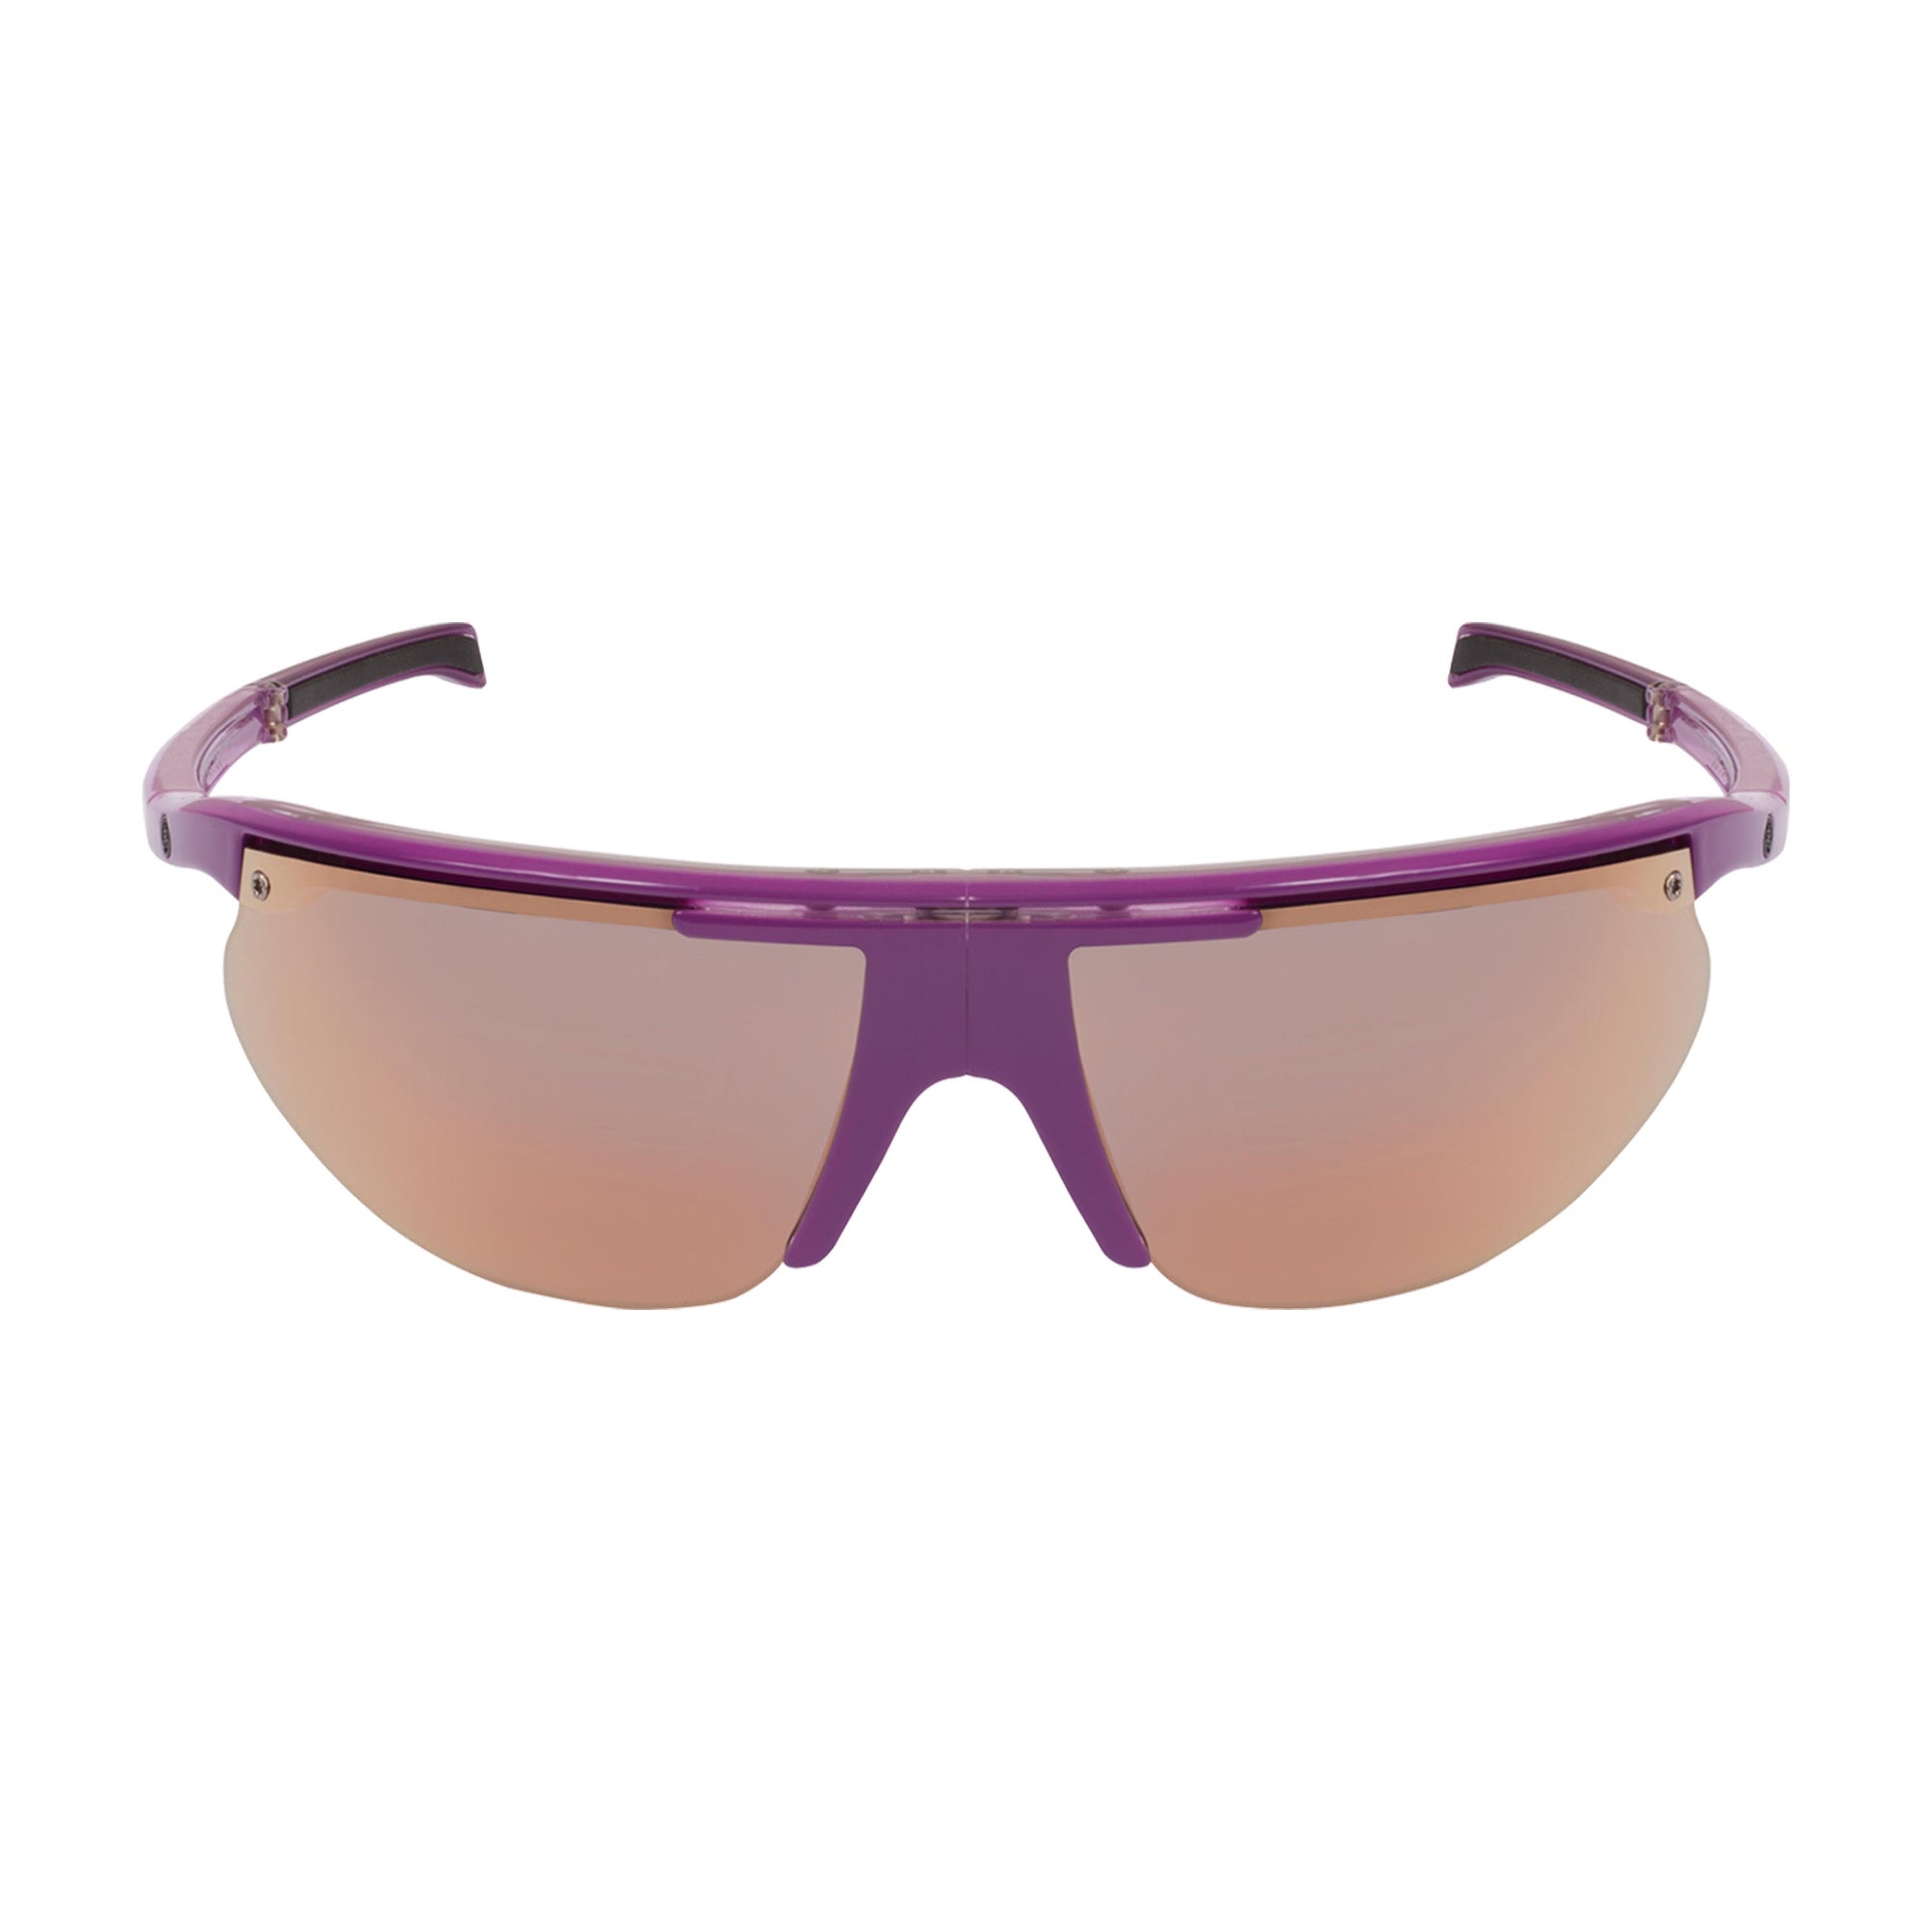 Popticals, Premium Compact Sunglasses, PopTrail, 030081-PFKN, Polarized Sunglasses, Gloss Lavender over Crystal Frame, Gray Lenses w/Pink Mirror Finish, Front View